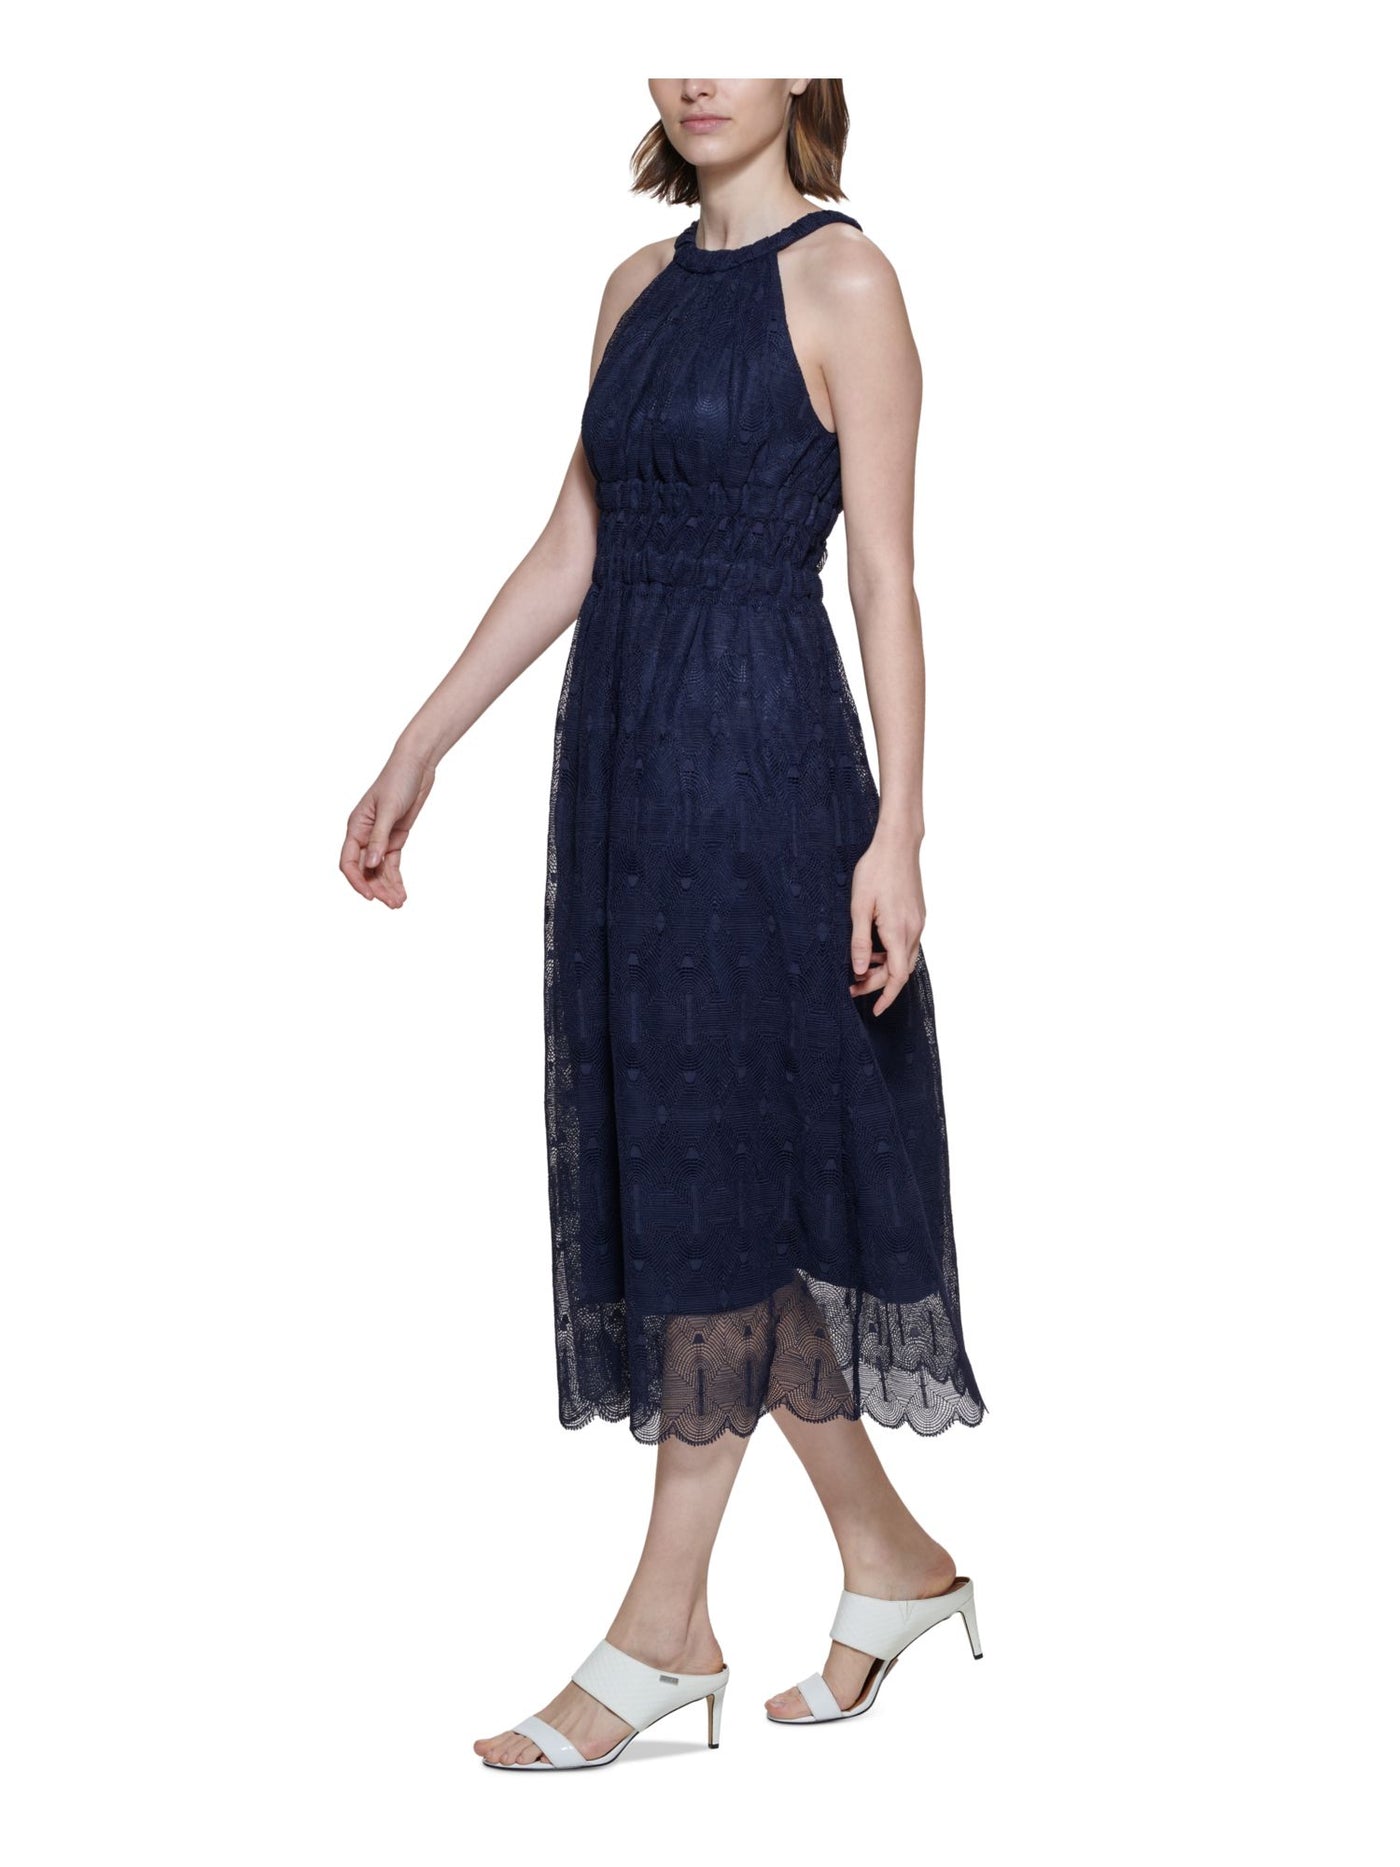 CALVIN KLEIN Womens Navy Zippered Textured Lace Lined Smocked Scalloped Sleeveless Halter Tea-Length Fit + Flare Dress 6